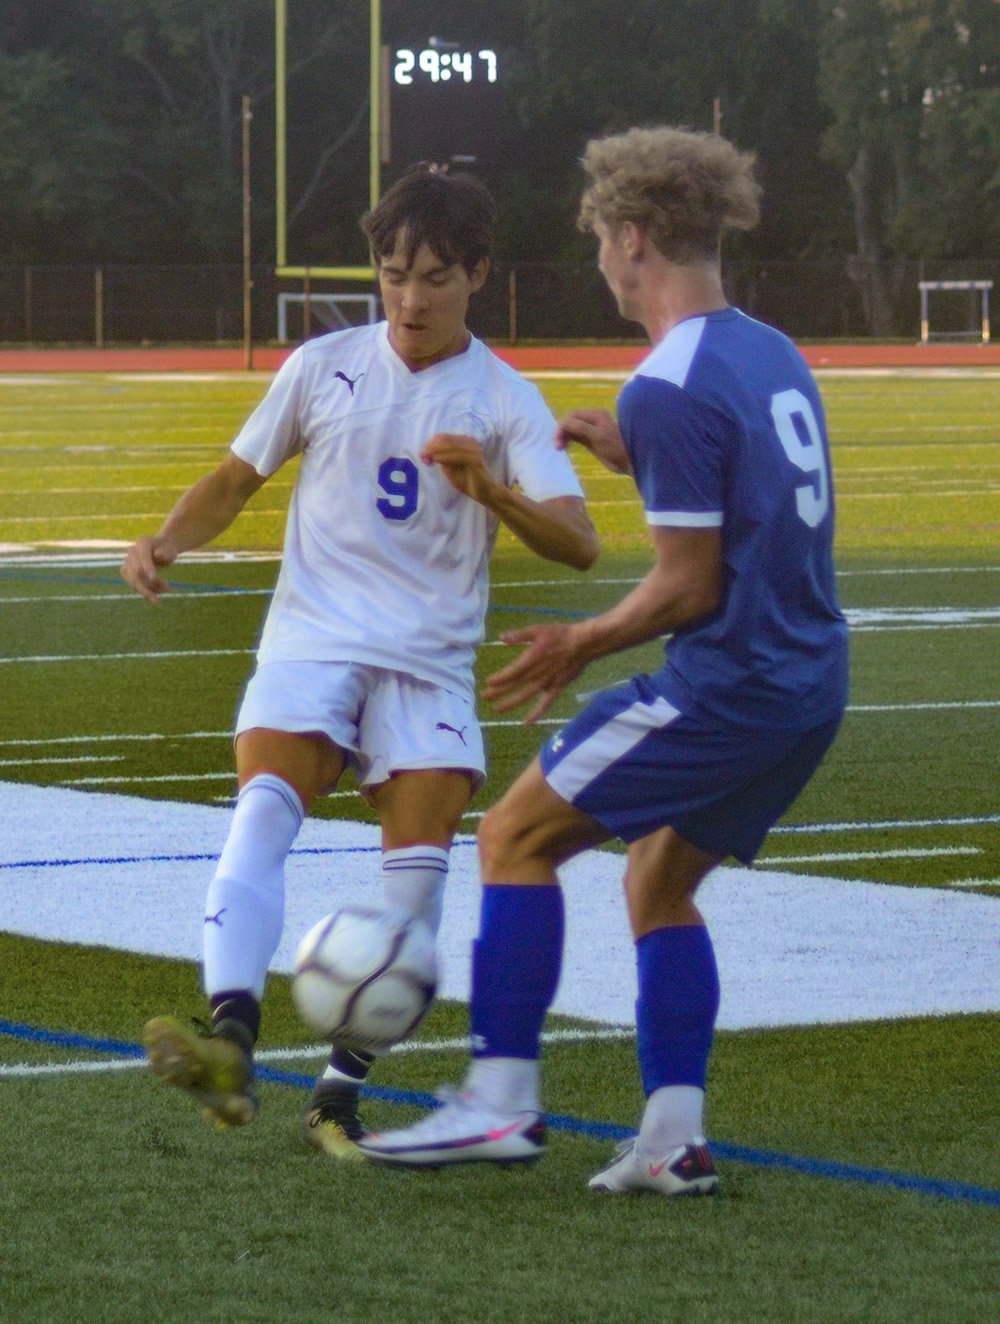 Valley Central’s Jude Remenar tries to play the ball past Goshen’s Alex Massa during Thursday’s non-league boys’ soccer game at Goshen High School.